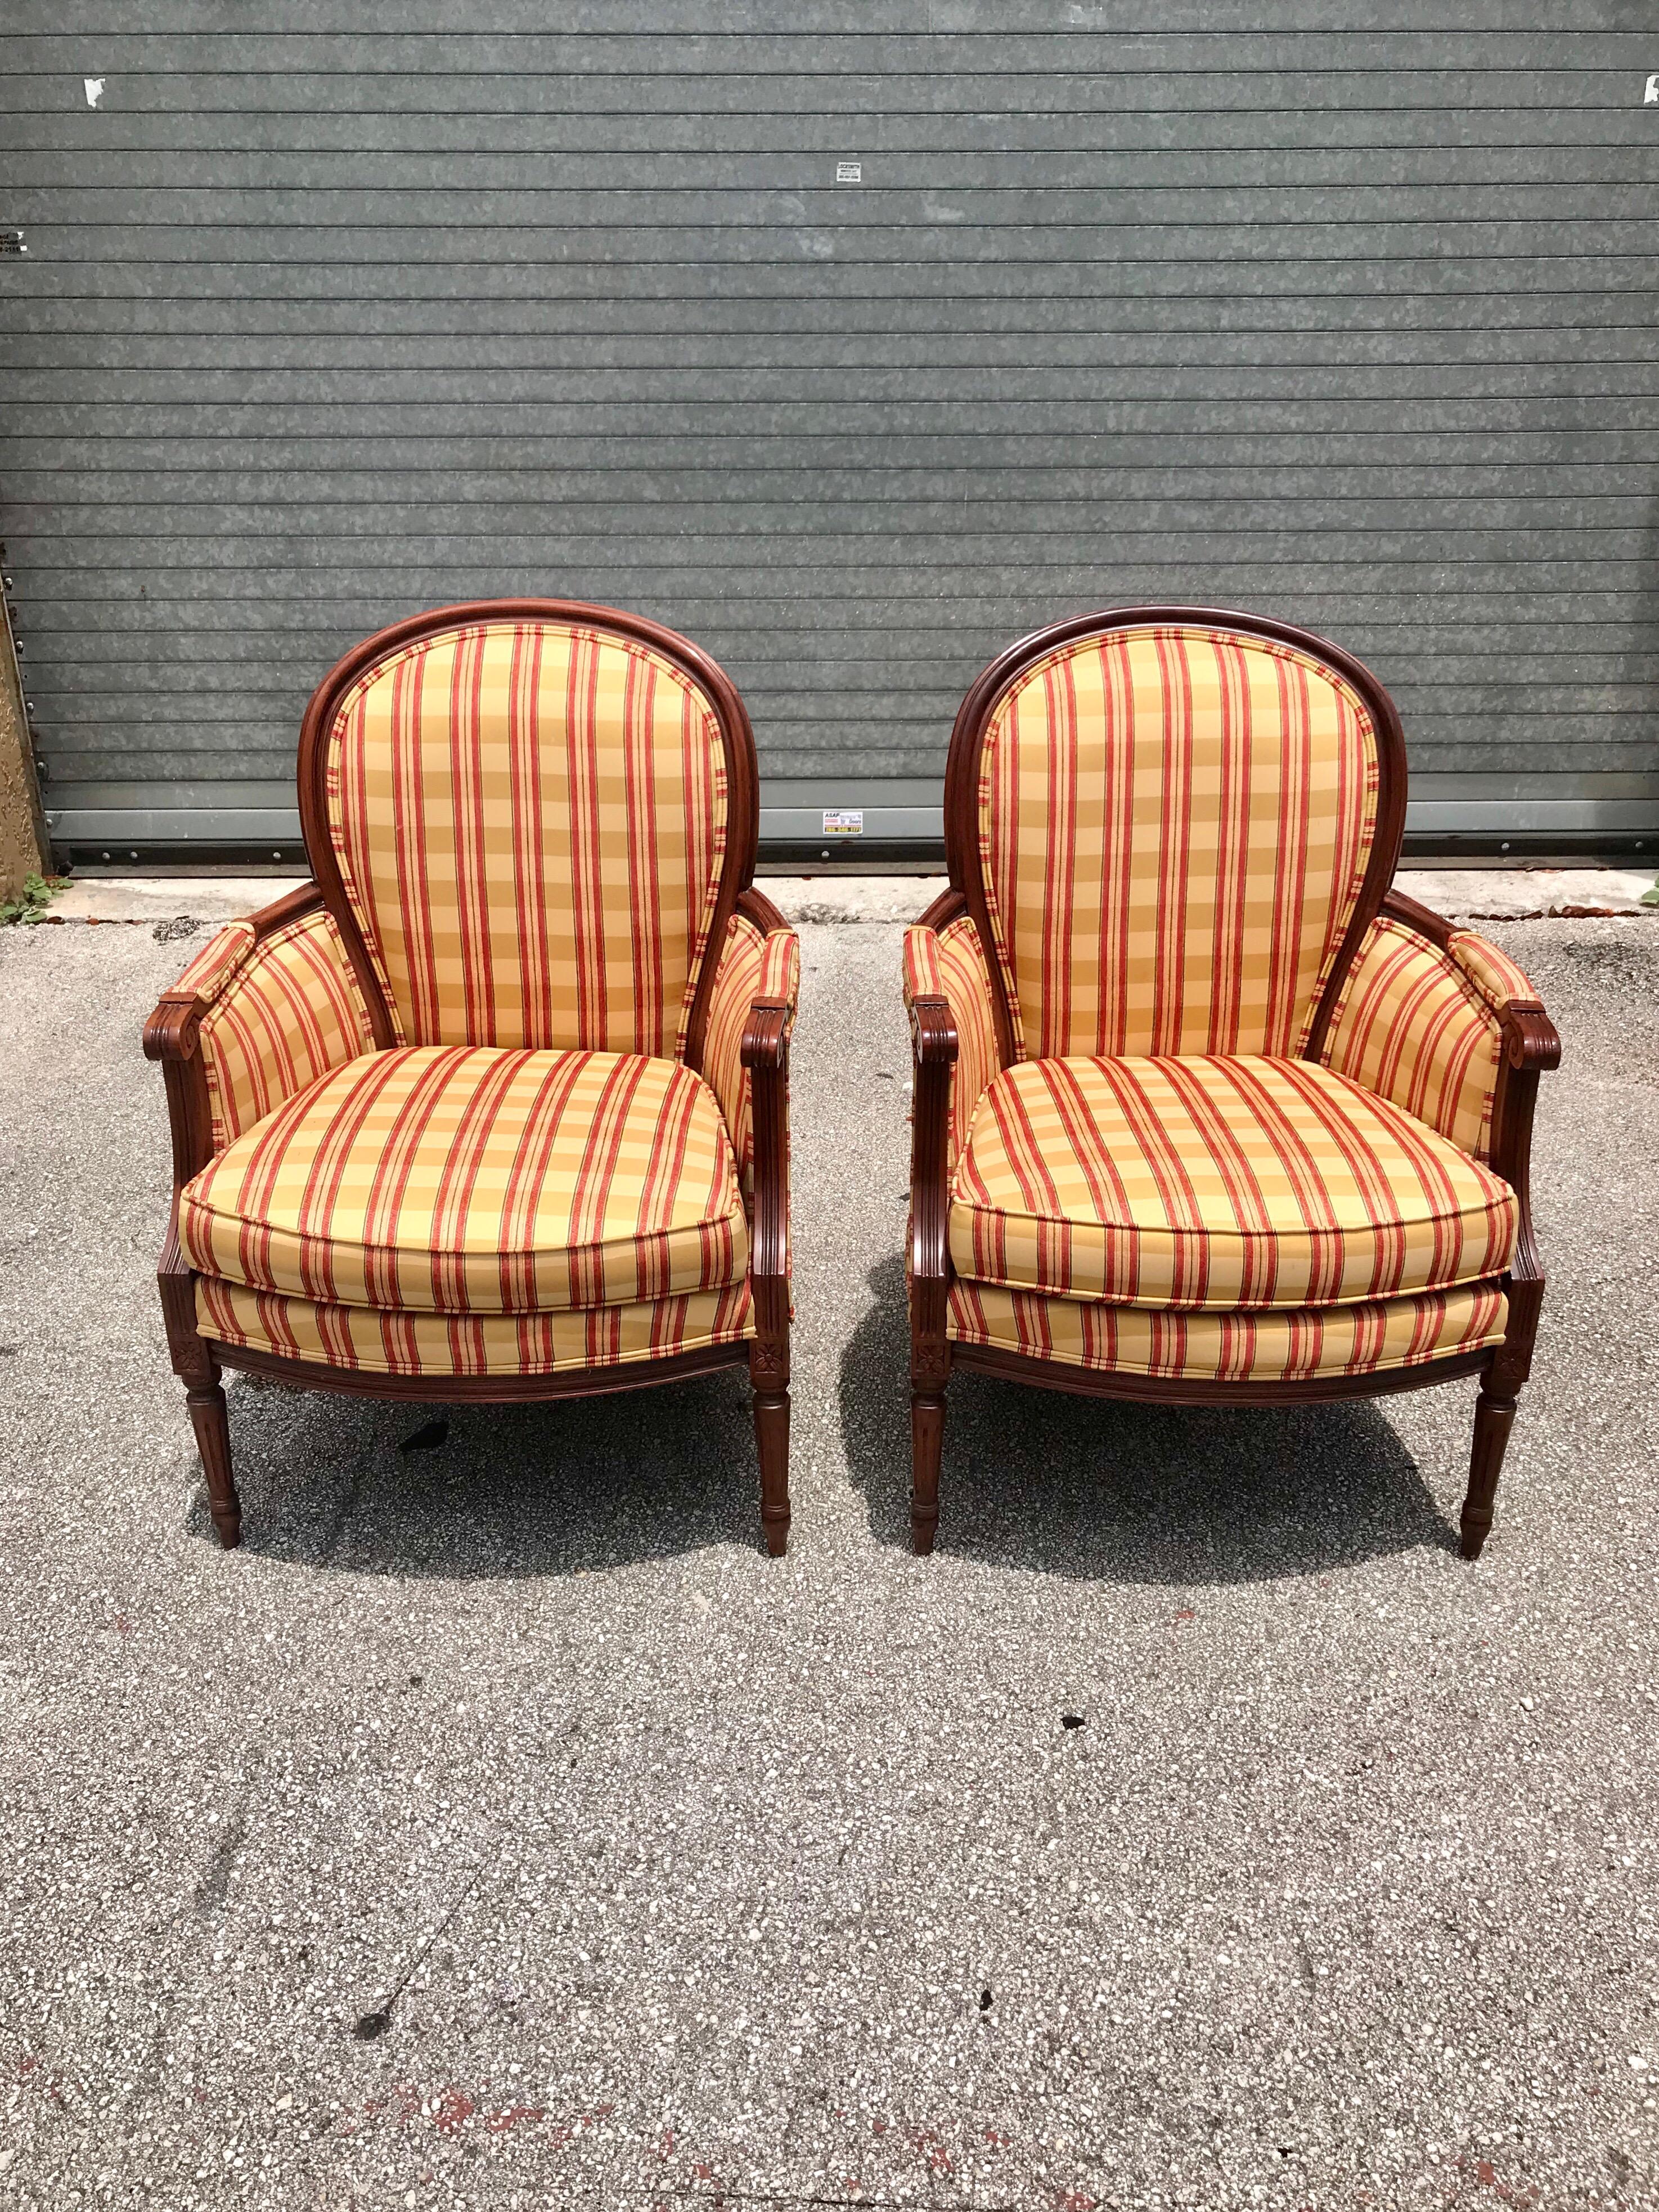 Pair of French Louis XVI accent chairs or Bergère chairs, with stripped upholstery, slightly larger size with padded arms. Subtle carved details on the frames, the fabric is in very good condition, chair frames are in excellent condition, the chairs